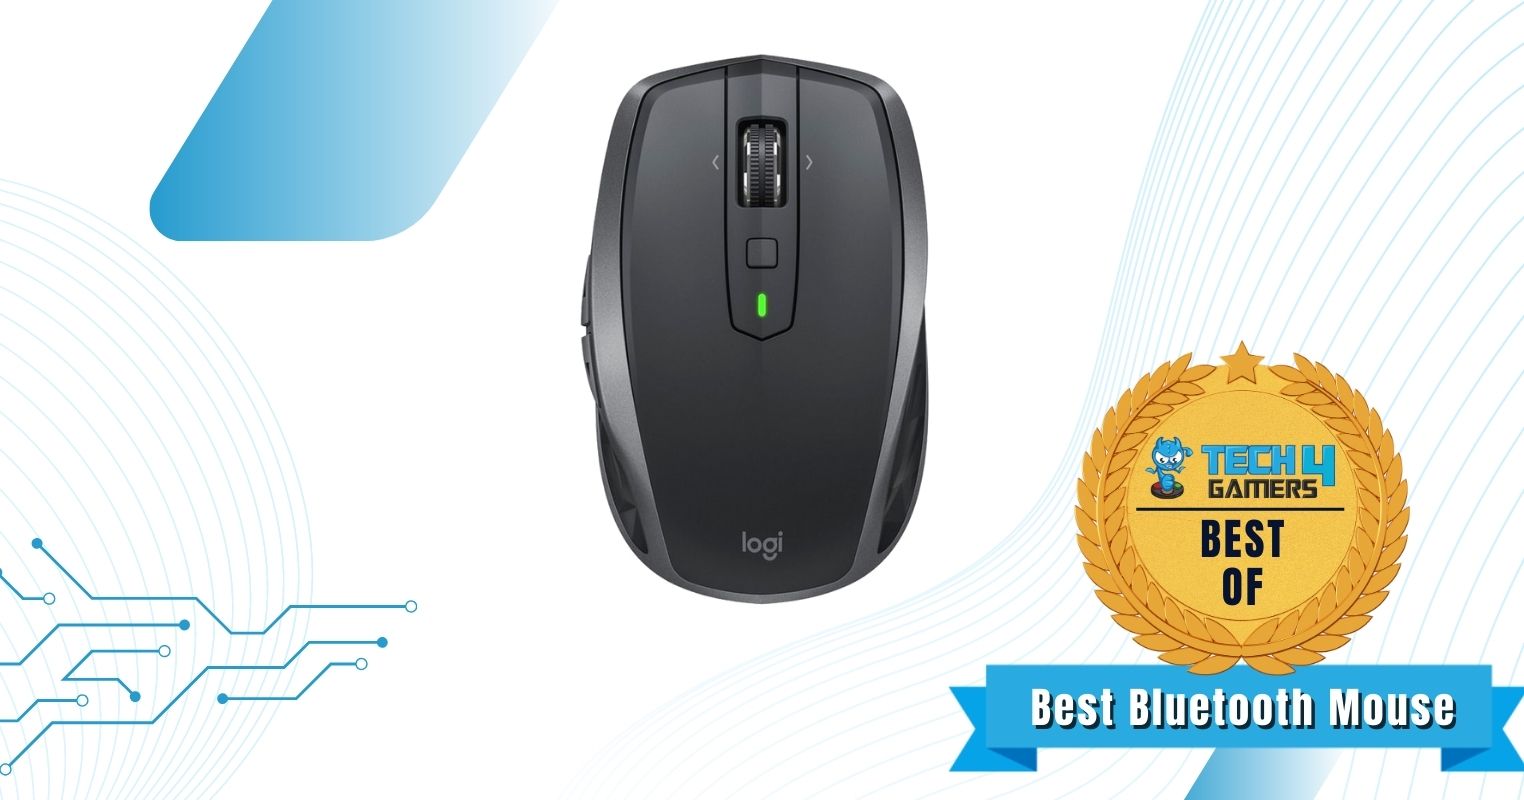 Best Bluetooth Mouse For Graphic Designing - Logitech MX Anywhere 2S